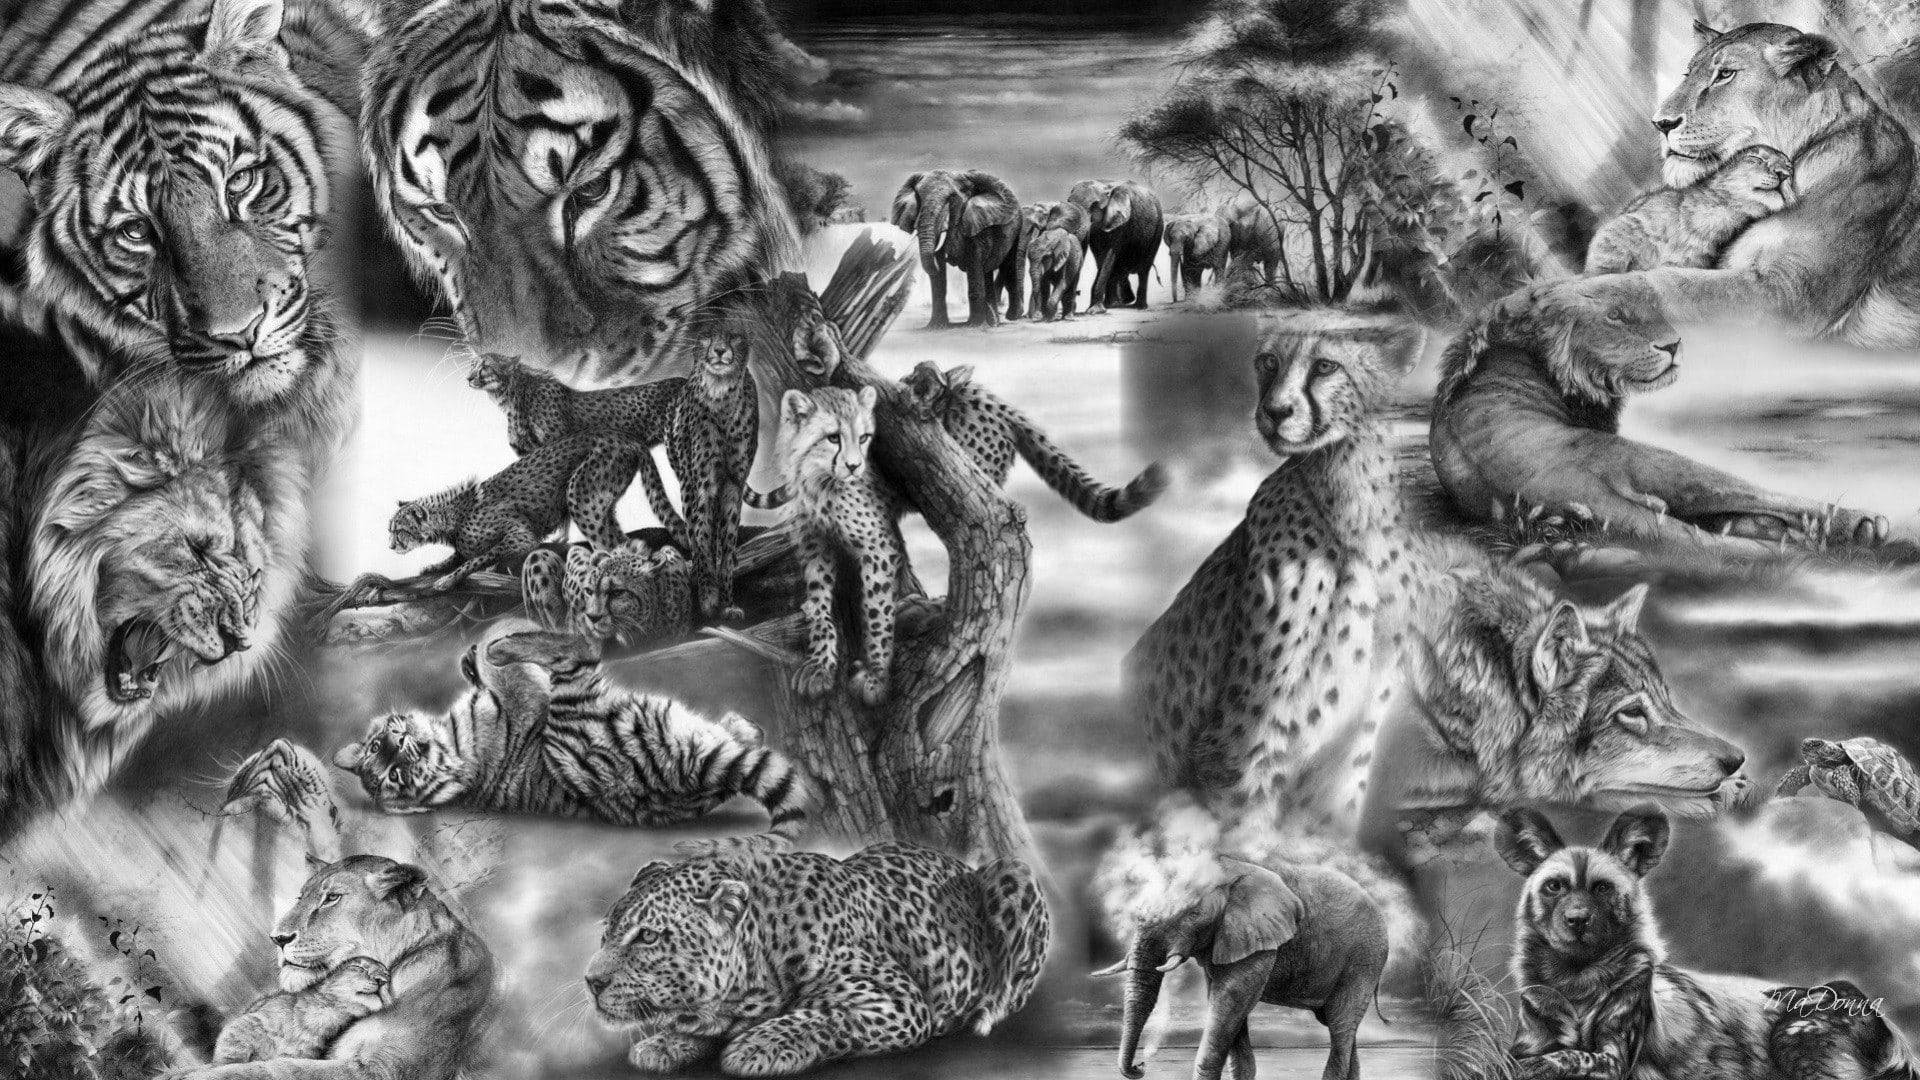 Monochrome Lion And Tiger Collage Wallpaper